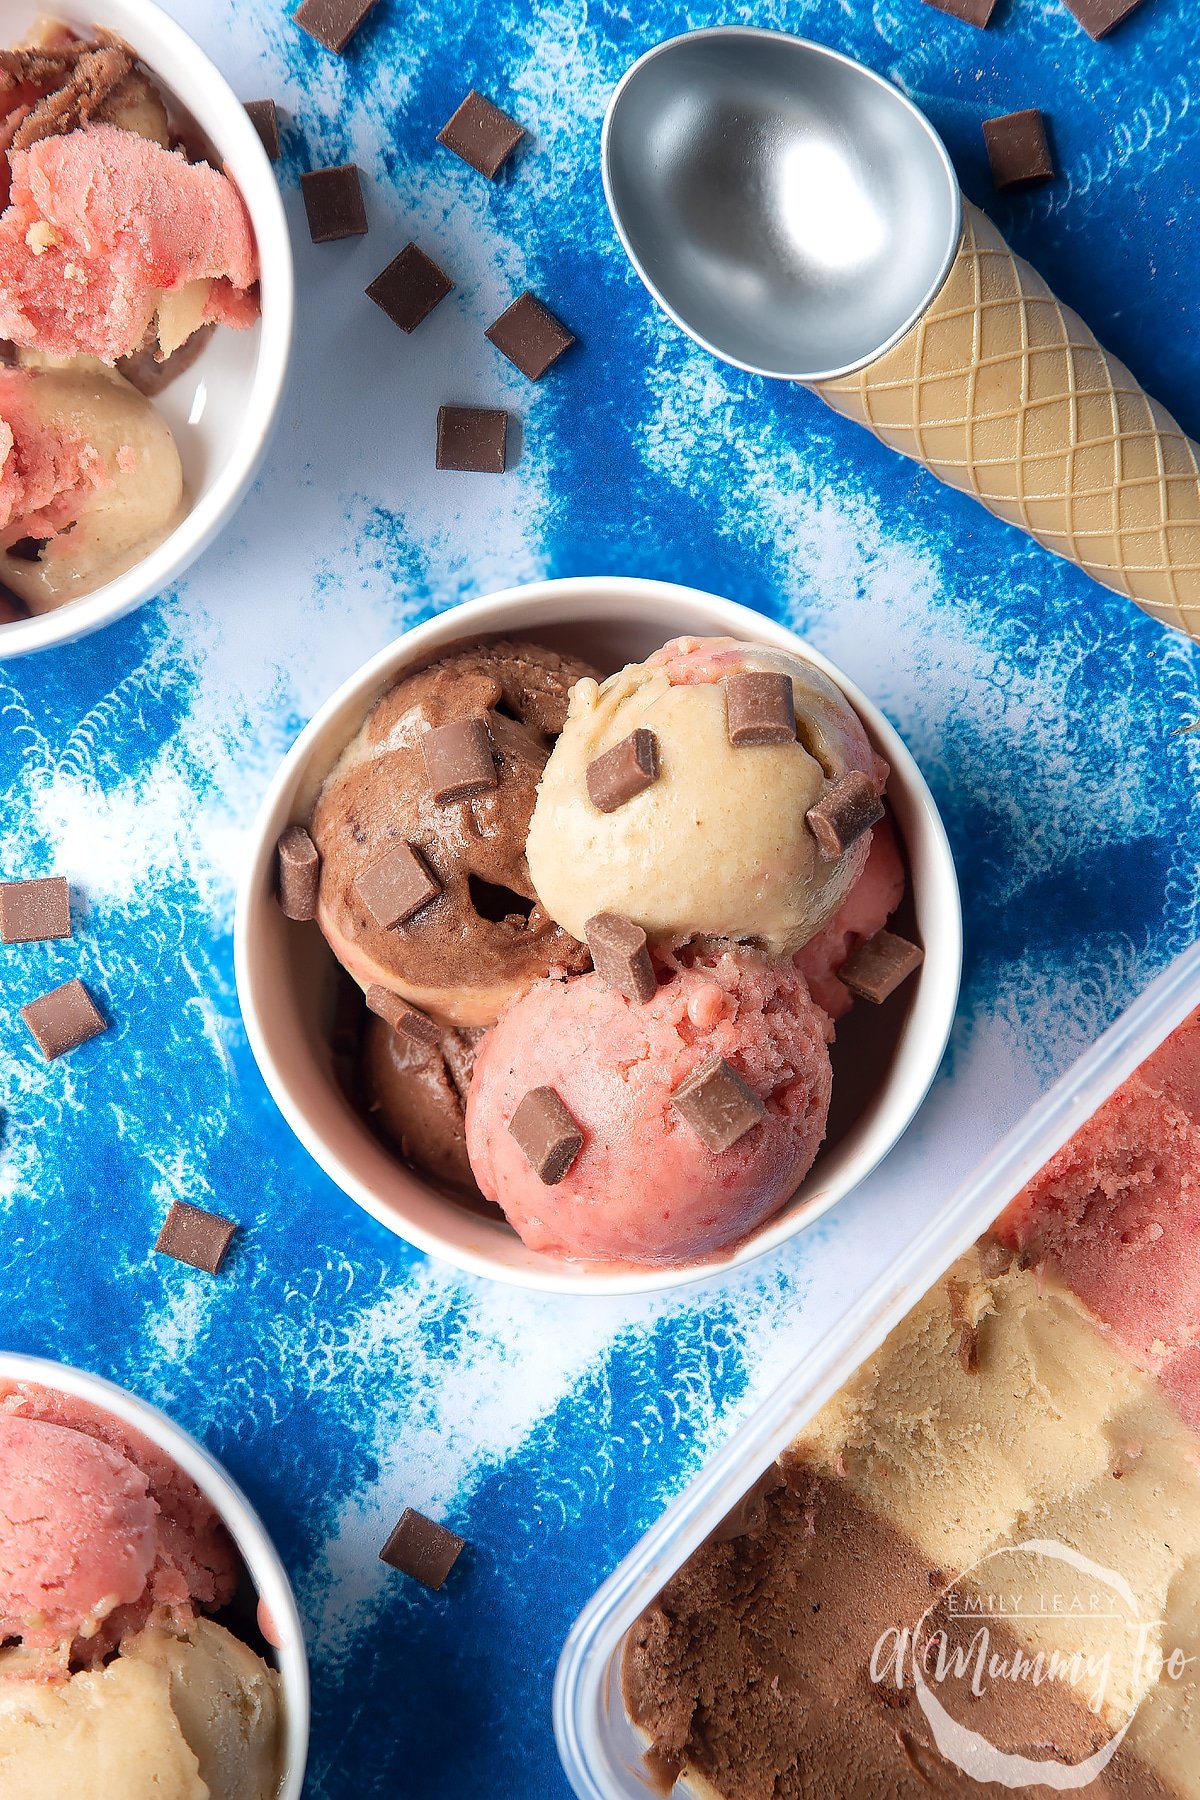 Dairy-free Neapolitan ice cream served in a small white bowl, topped with chocolate chips. An ice cream scoop and scattered chocolate chips are also shown.